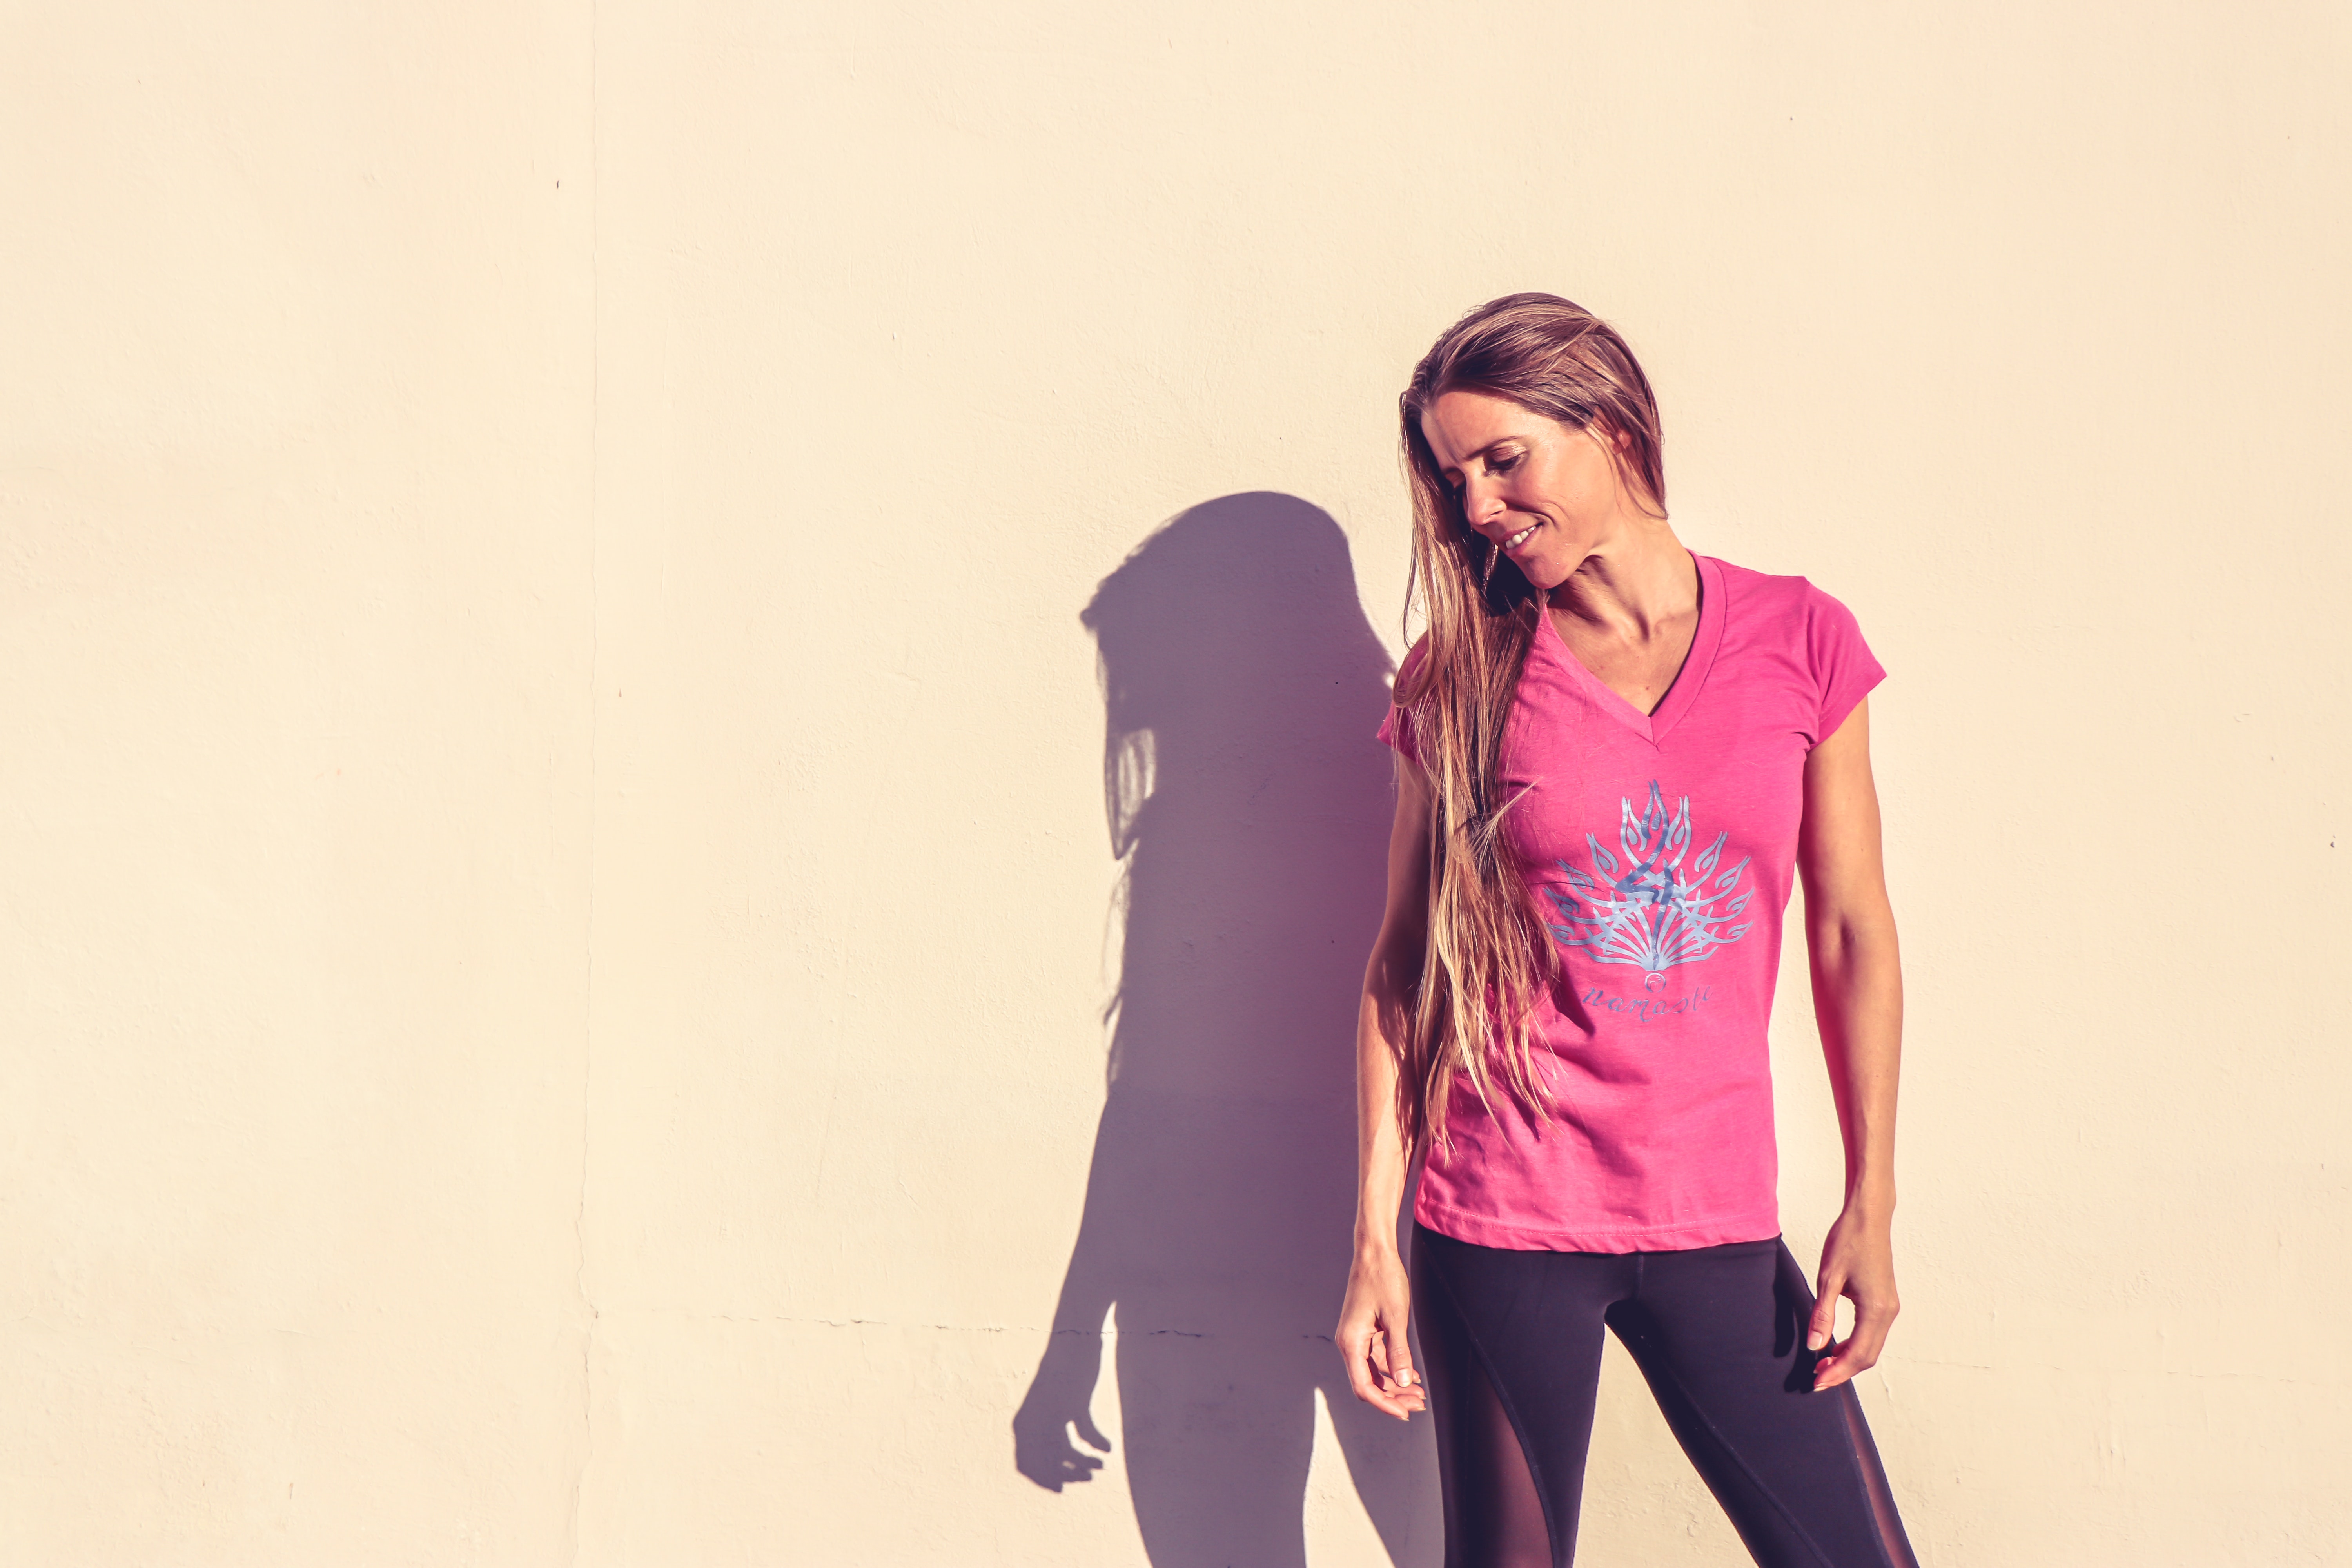 Woman in Pink V-neck Cap-sleeved Shirt Standing Near Wall, Casual, Person, Woman, Wear, HQ Photo